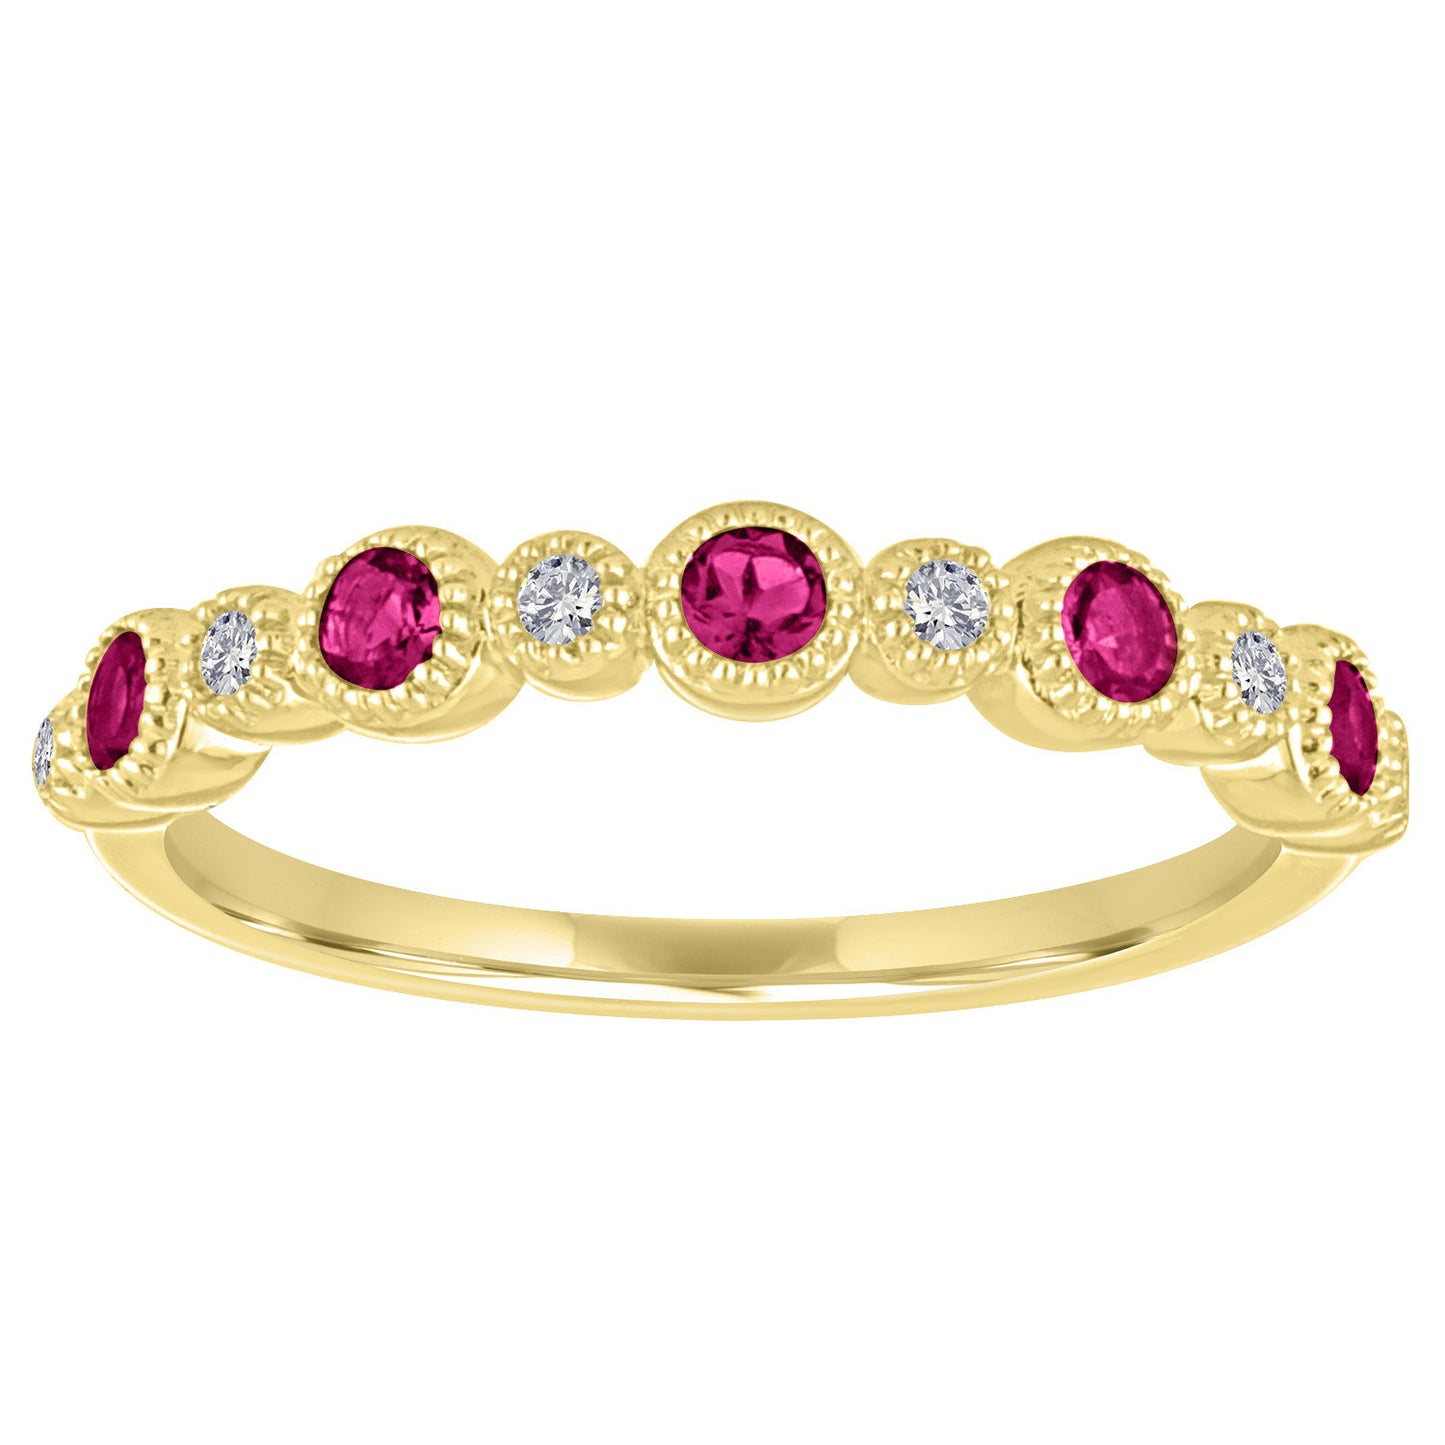 Yellow gold skinny band with large round rubies and small round diamonds.